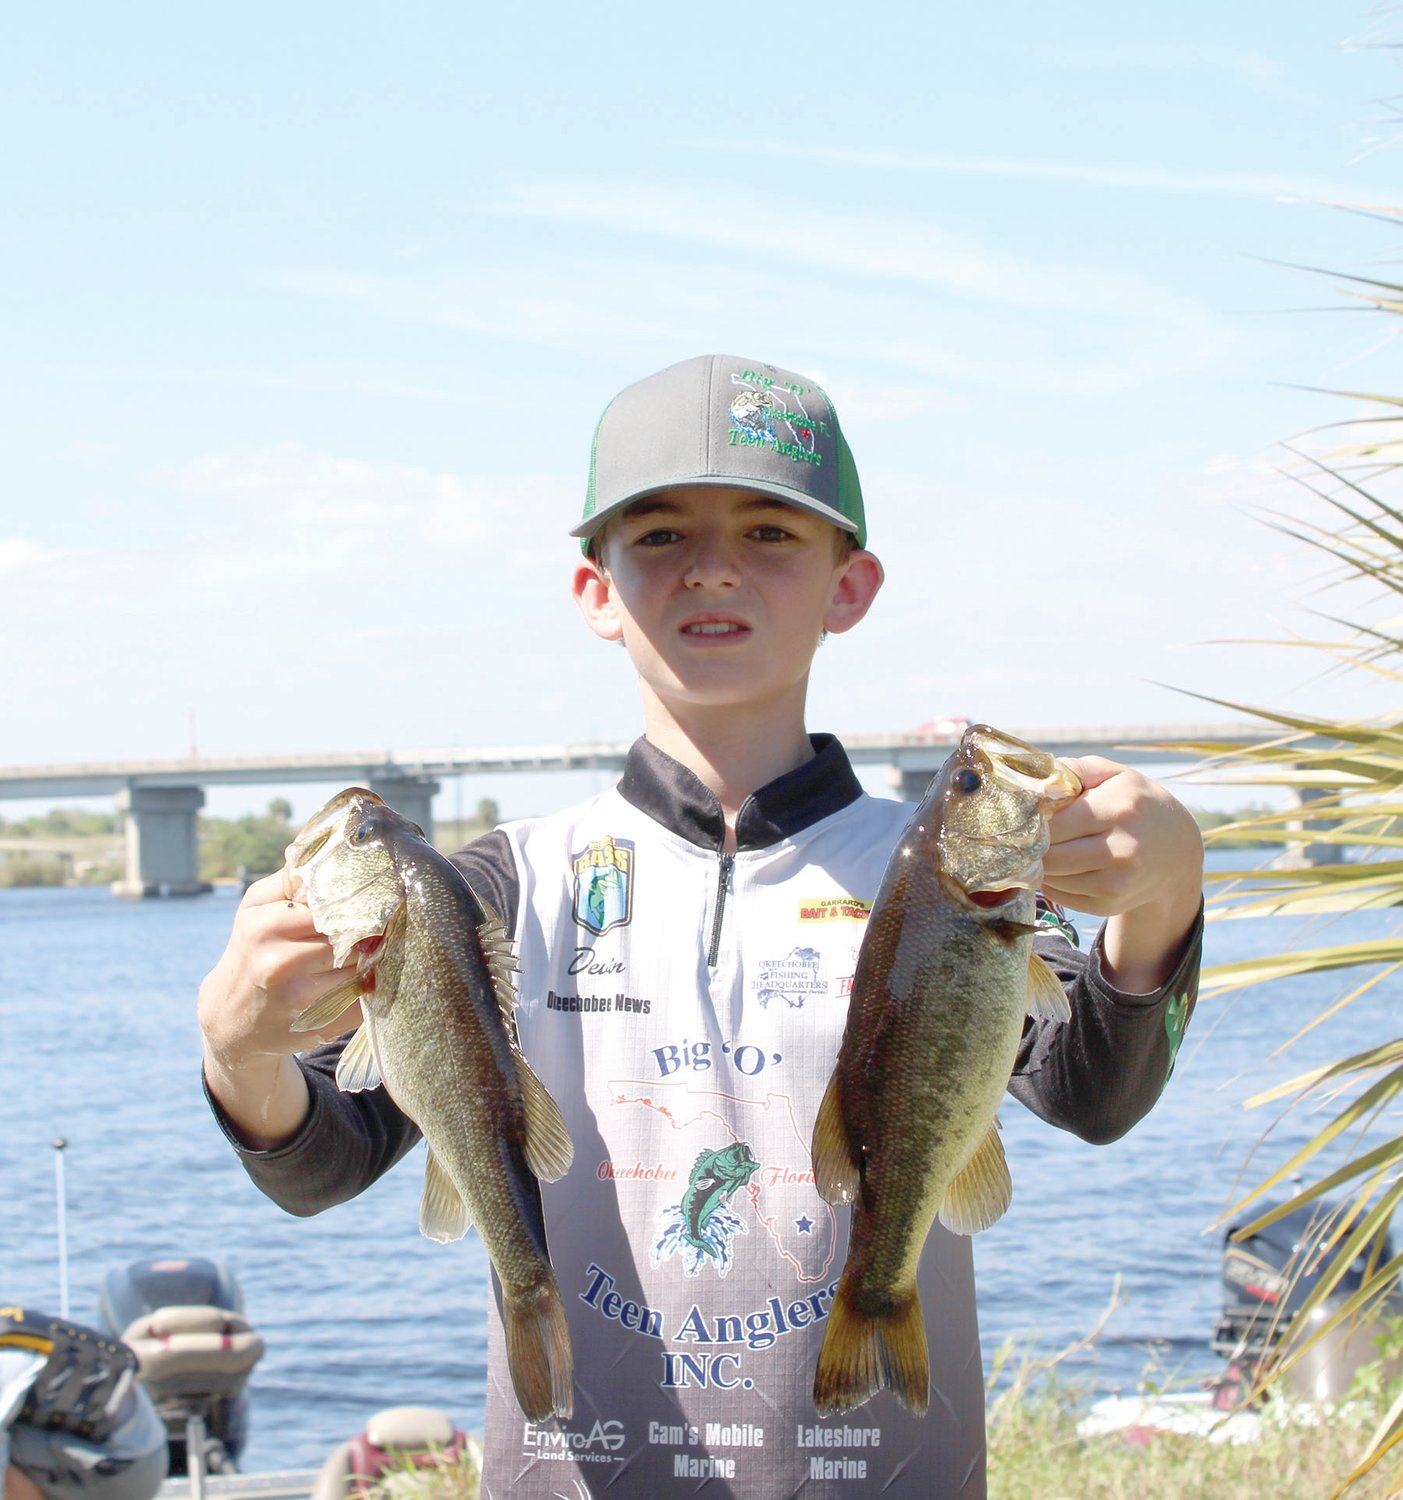 Third place winner in the 9-13 age group was Devin Diehl with 4.55 pounds.